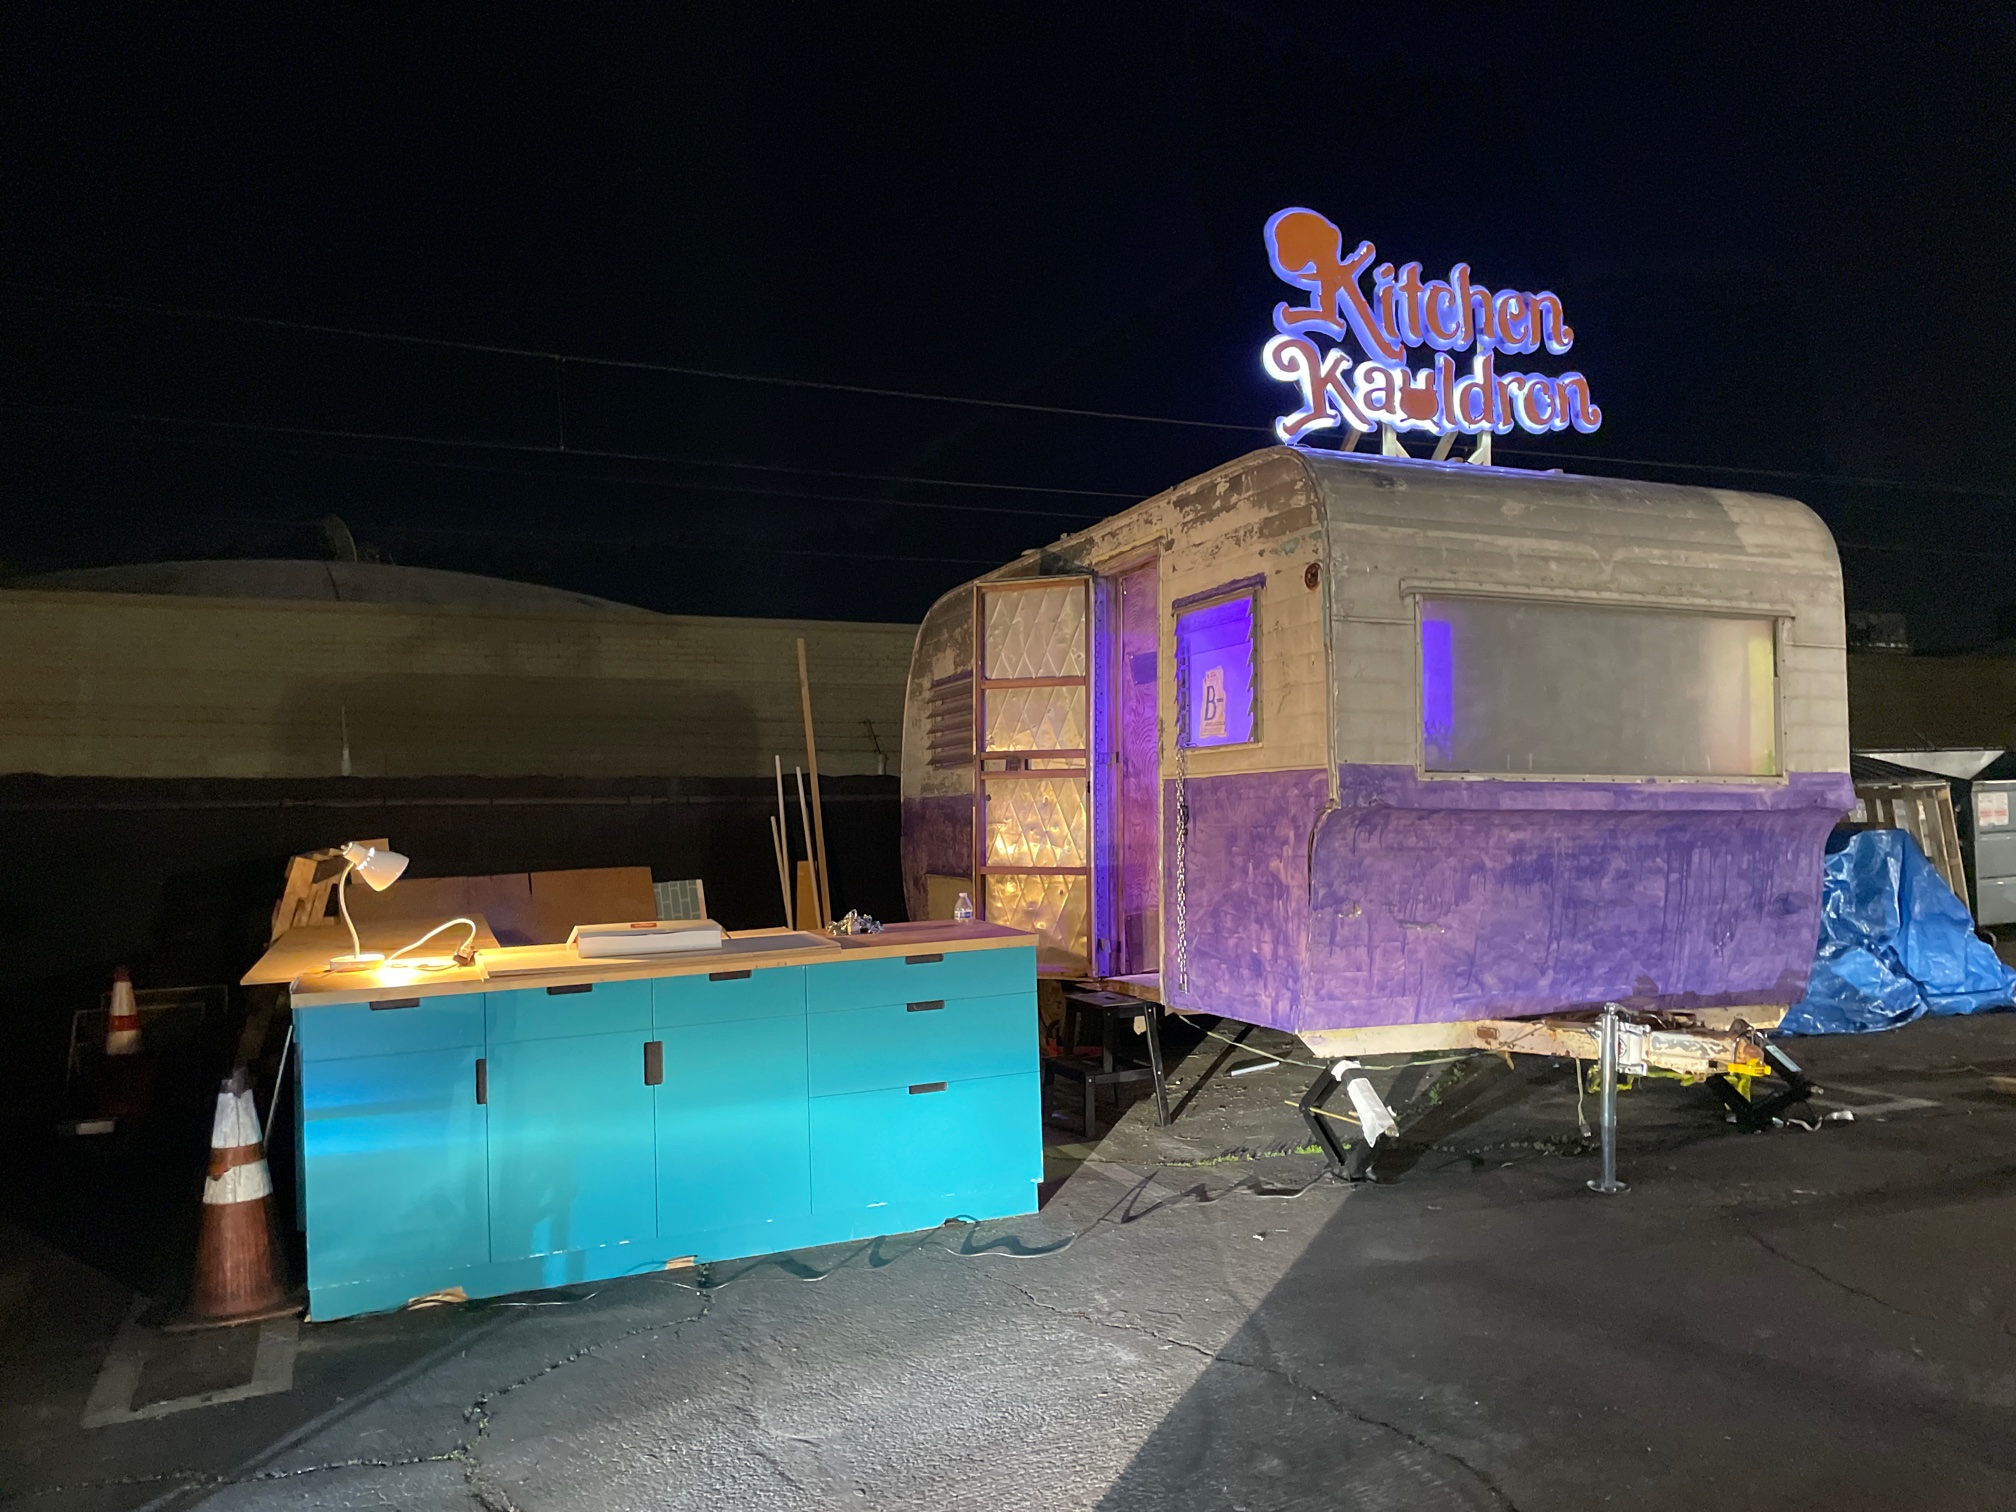 Students built a magical, immersive world with fun, physical props that they scavenged, designed, and 3D printed within the interior of a beaten down trailer parked on the ArtCenter campus.